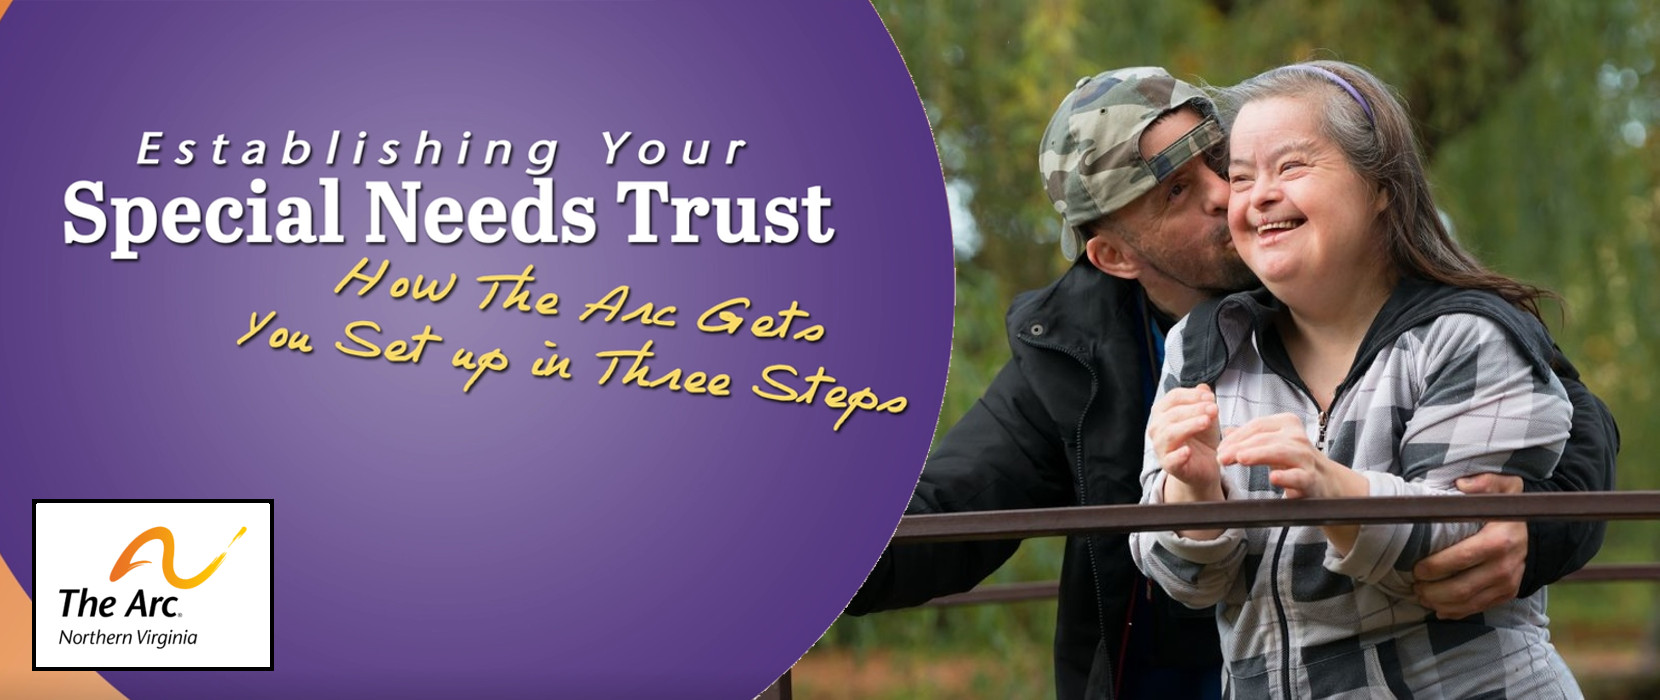 White text over a purple circle background reads Establishing your special needs trust How The Arc gets you set up in thee steps. Next to the purple circle is a photo of a man and woman, both are outdoors wearing jackets. The man has a baseball hat on backwards, and is kissing his wife on the cheek.